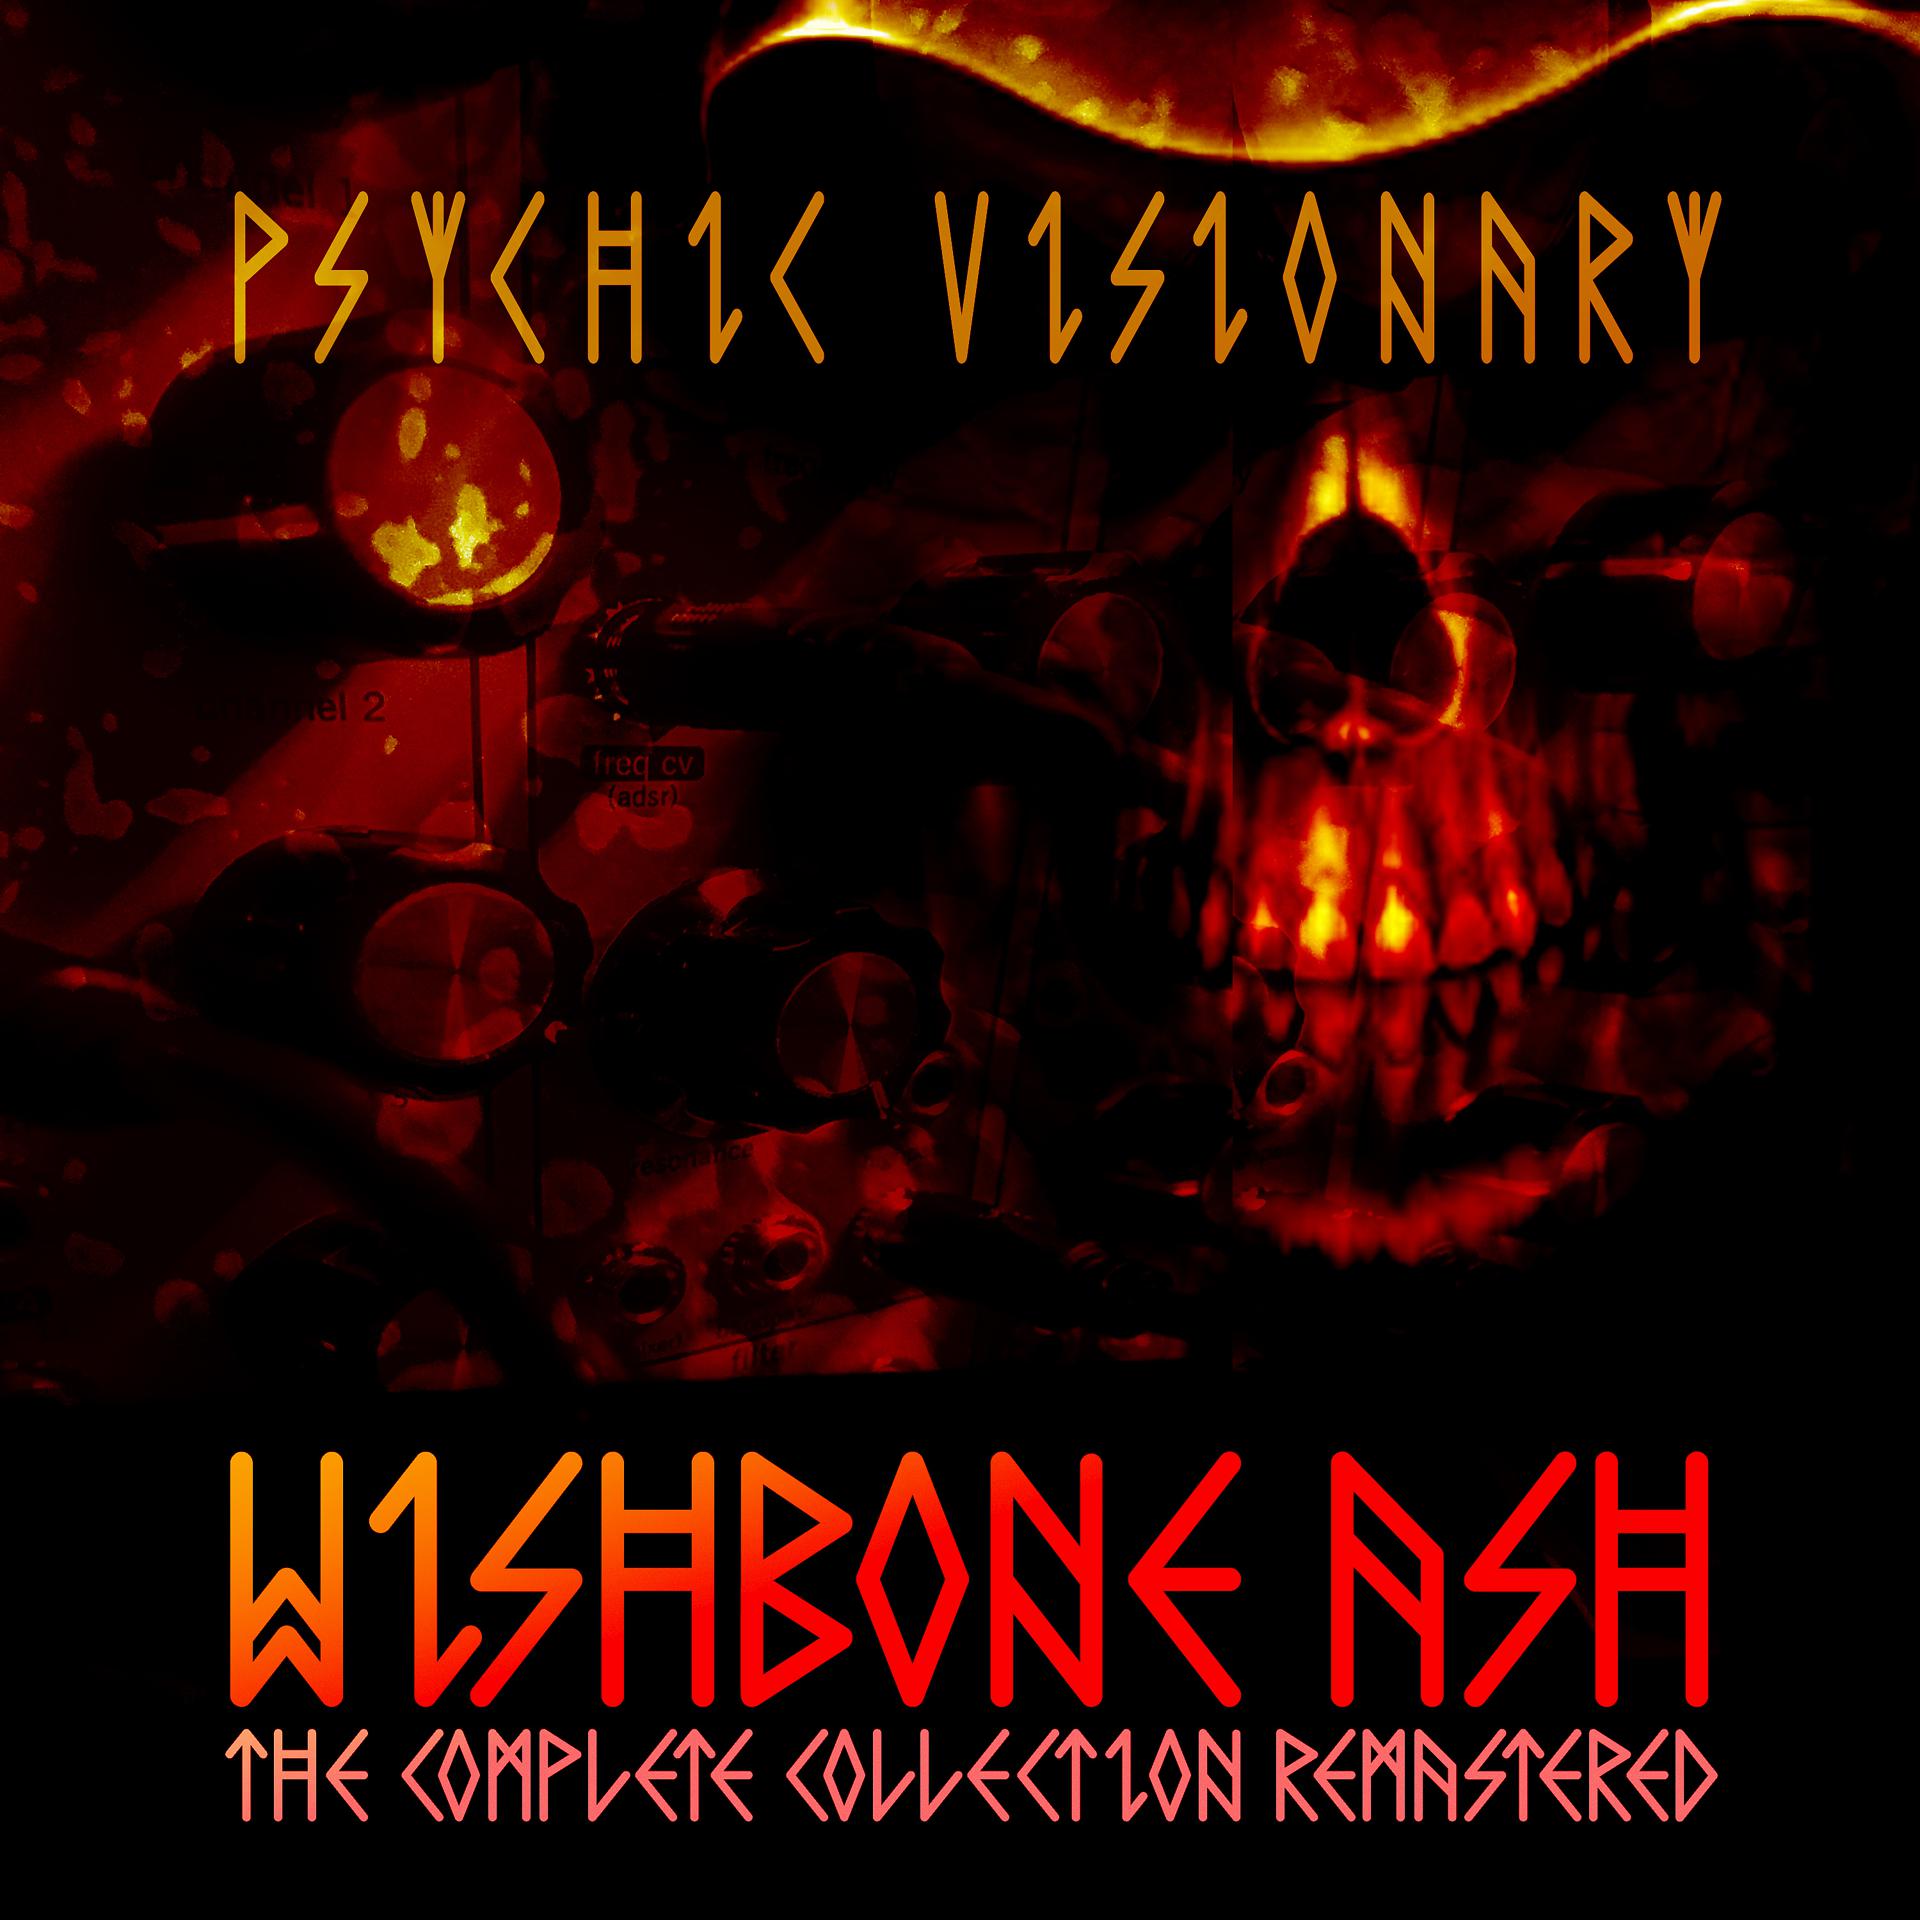 Постер альбома Psychic Visionary - the Complete Collection Remastered